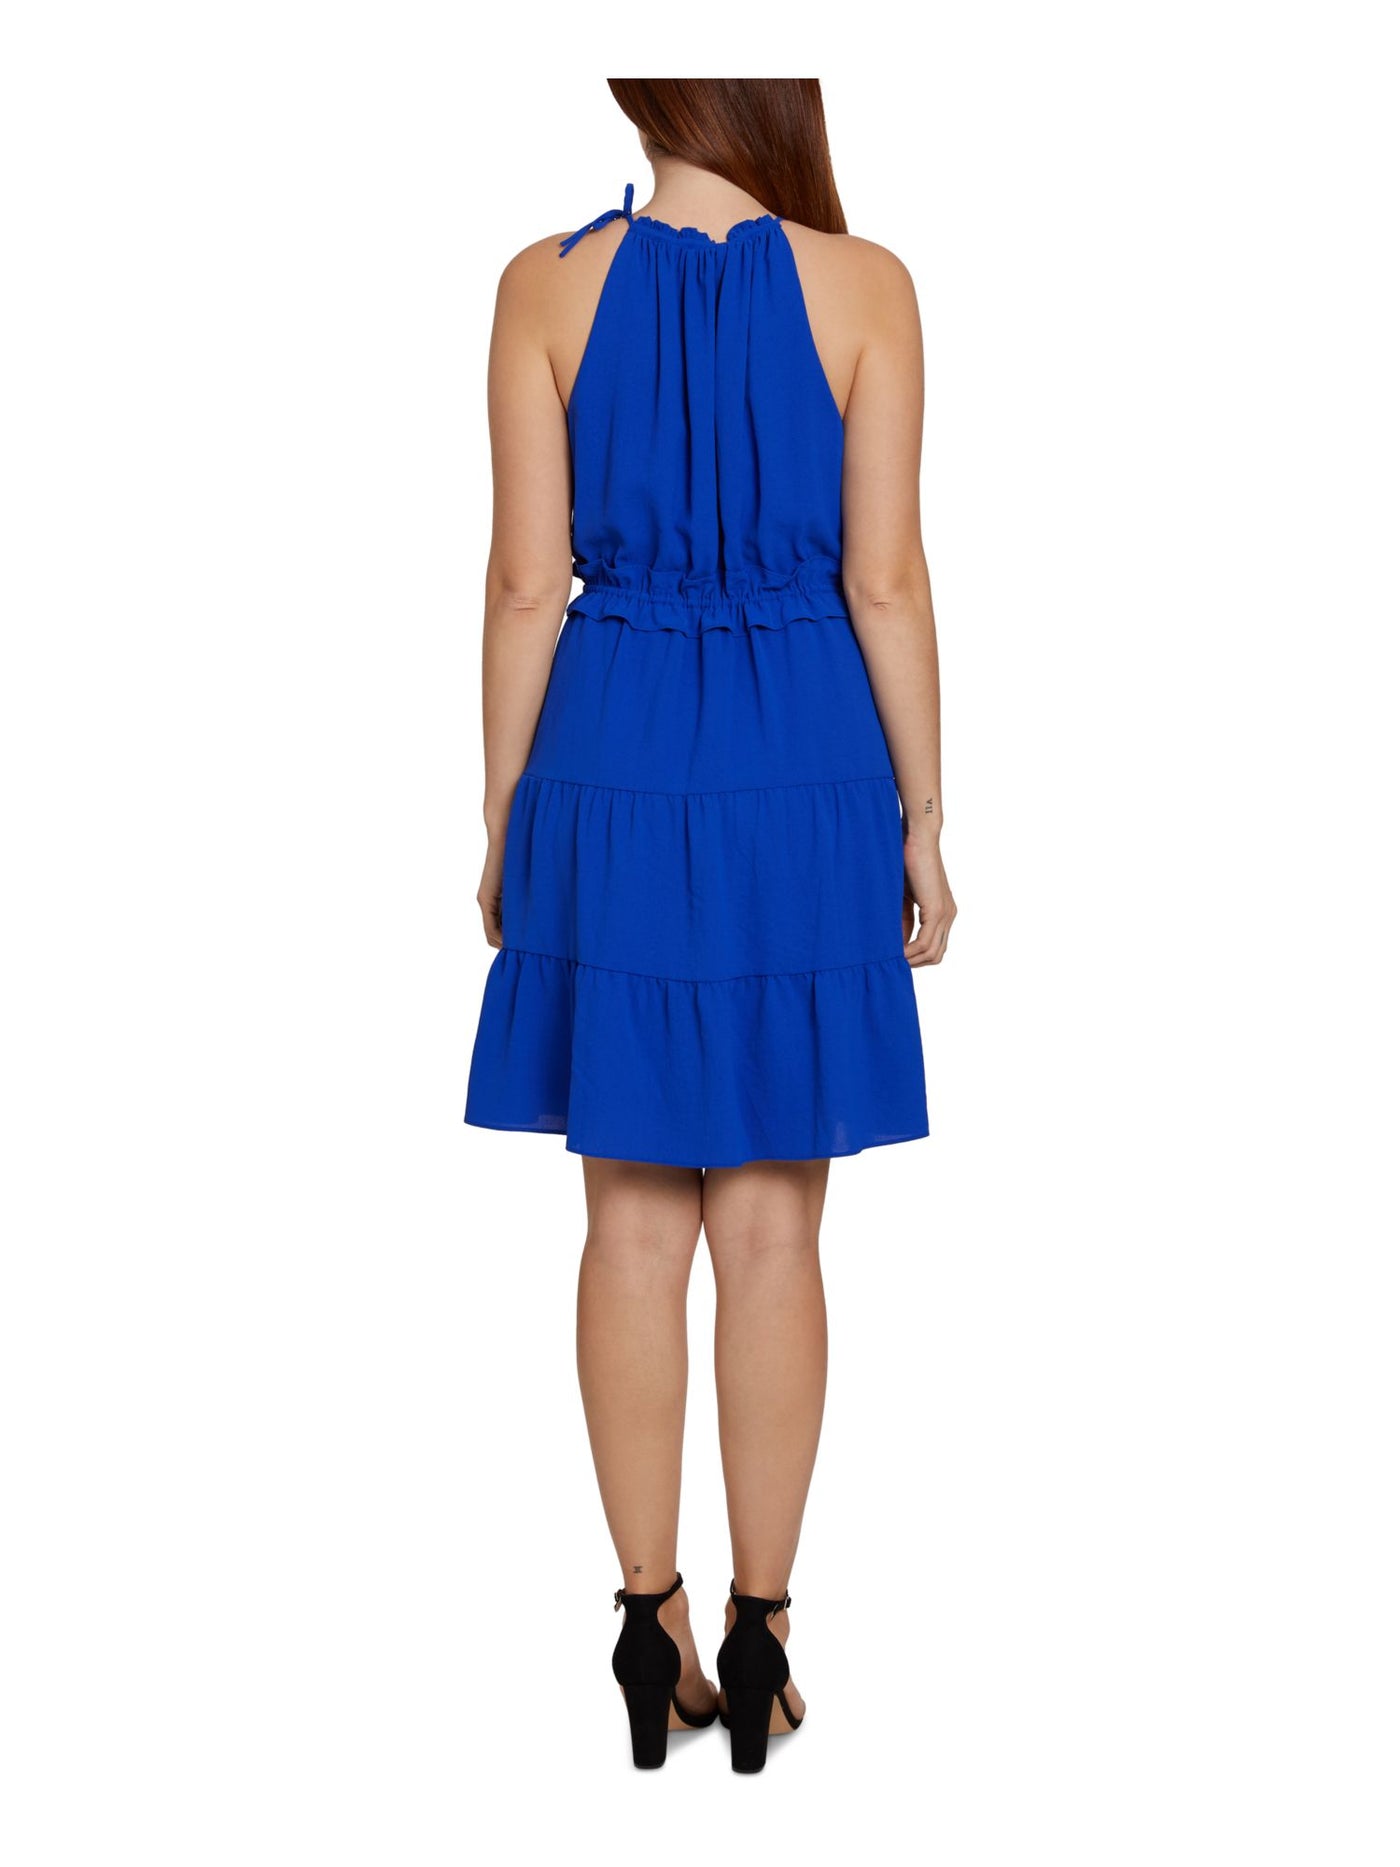 SAGE COLLECTIVE Womens Blue Ruffled Drawstrings Tiered Hem Lined Sleeveless Halter Above The Knee Fit + Flare Dress 8P